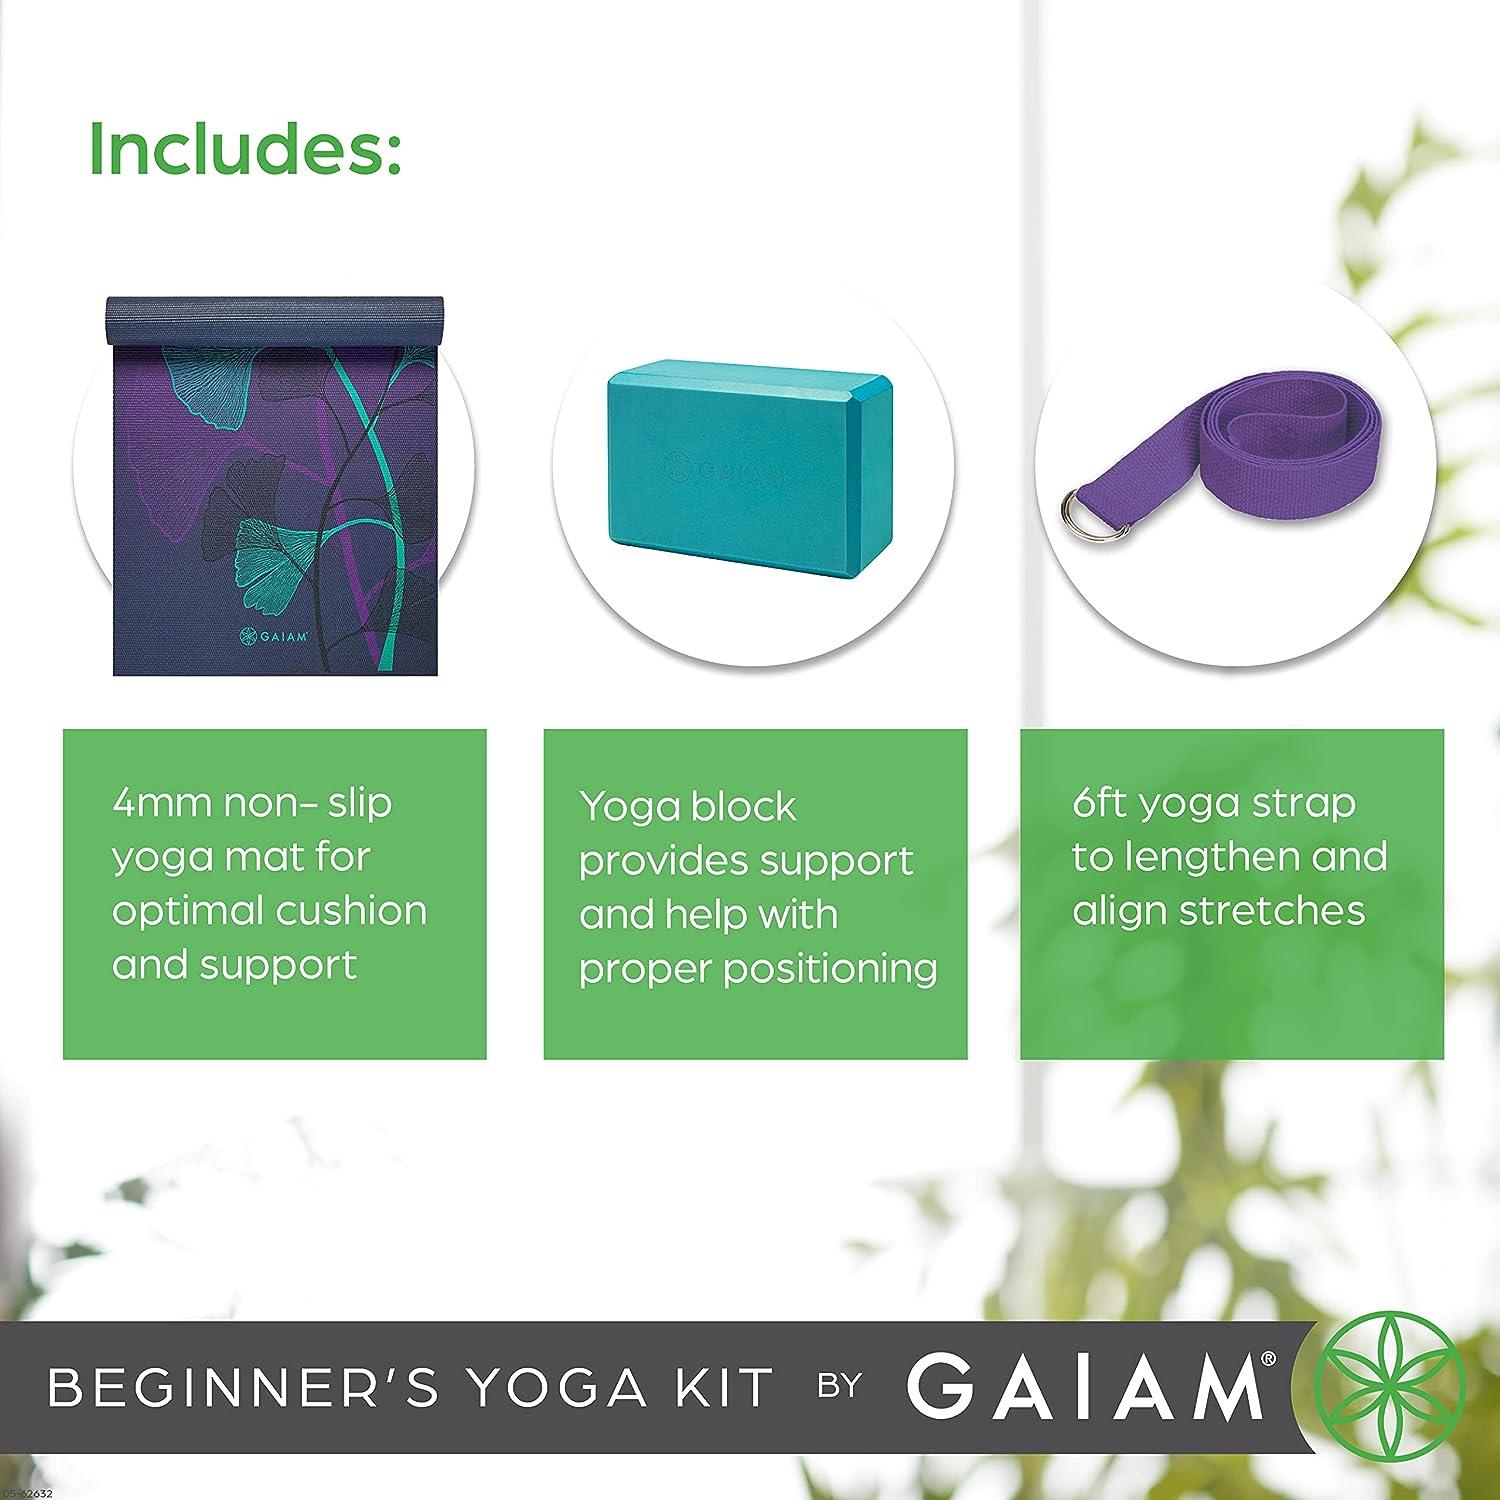 Yoga Strap (6ft) from Gaiam